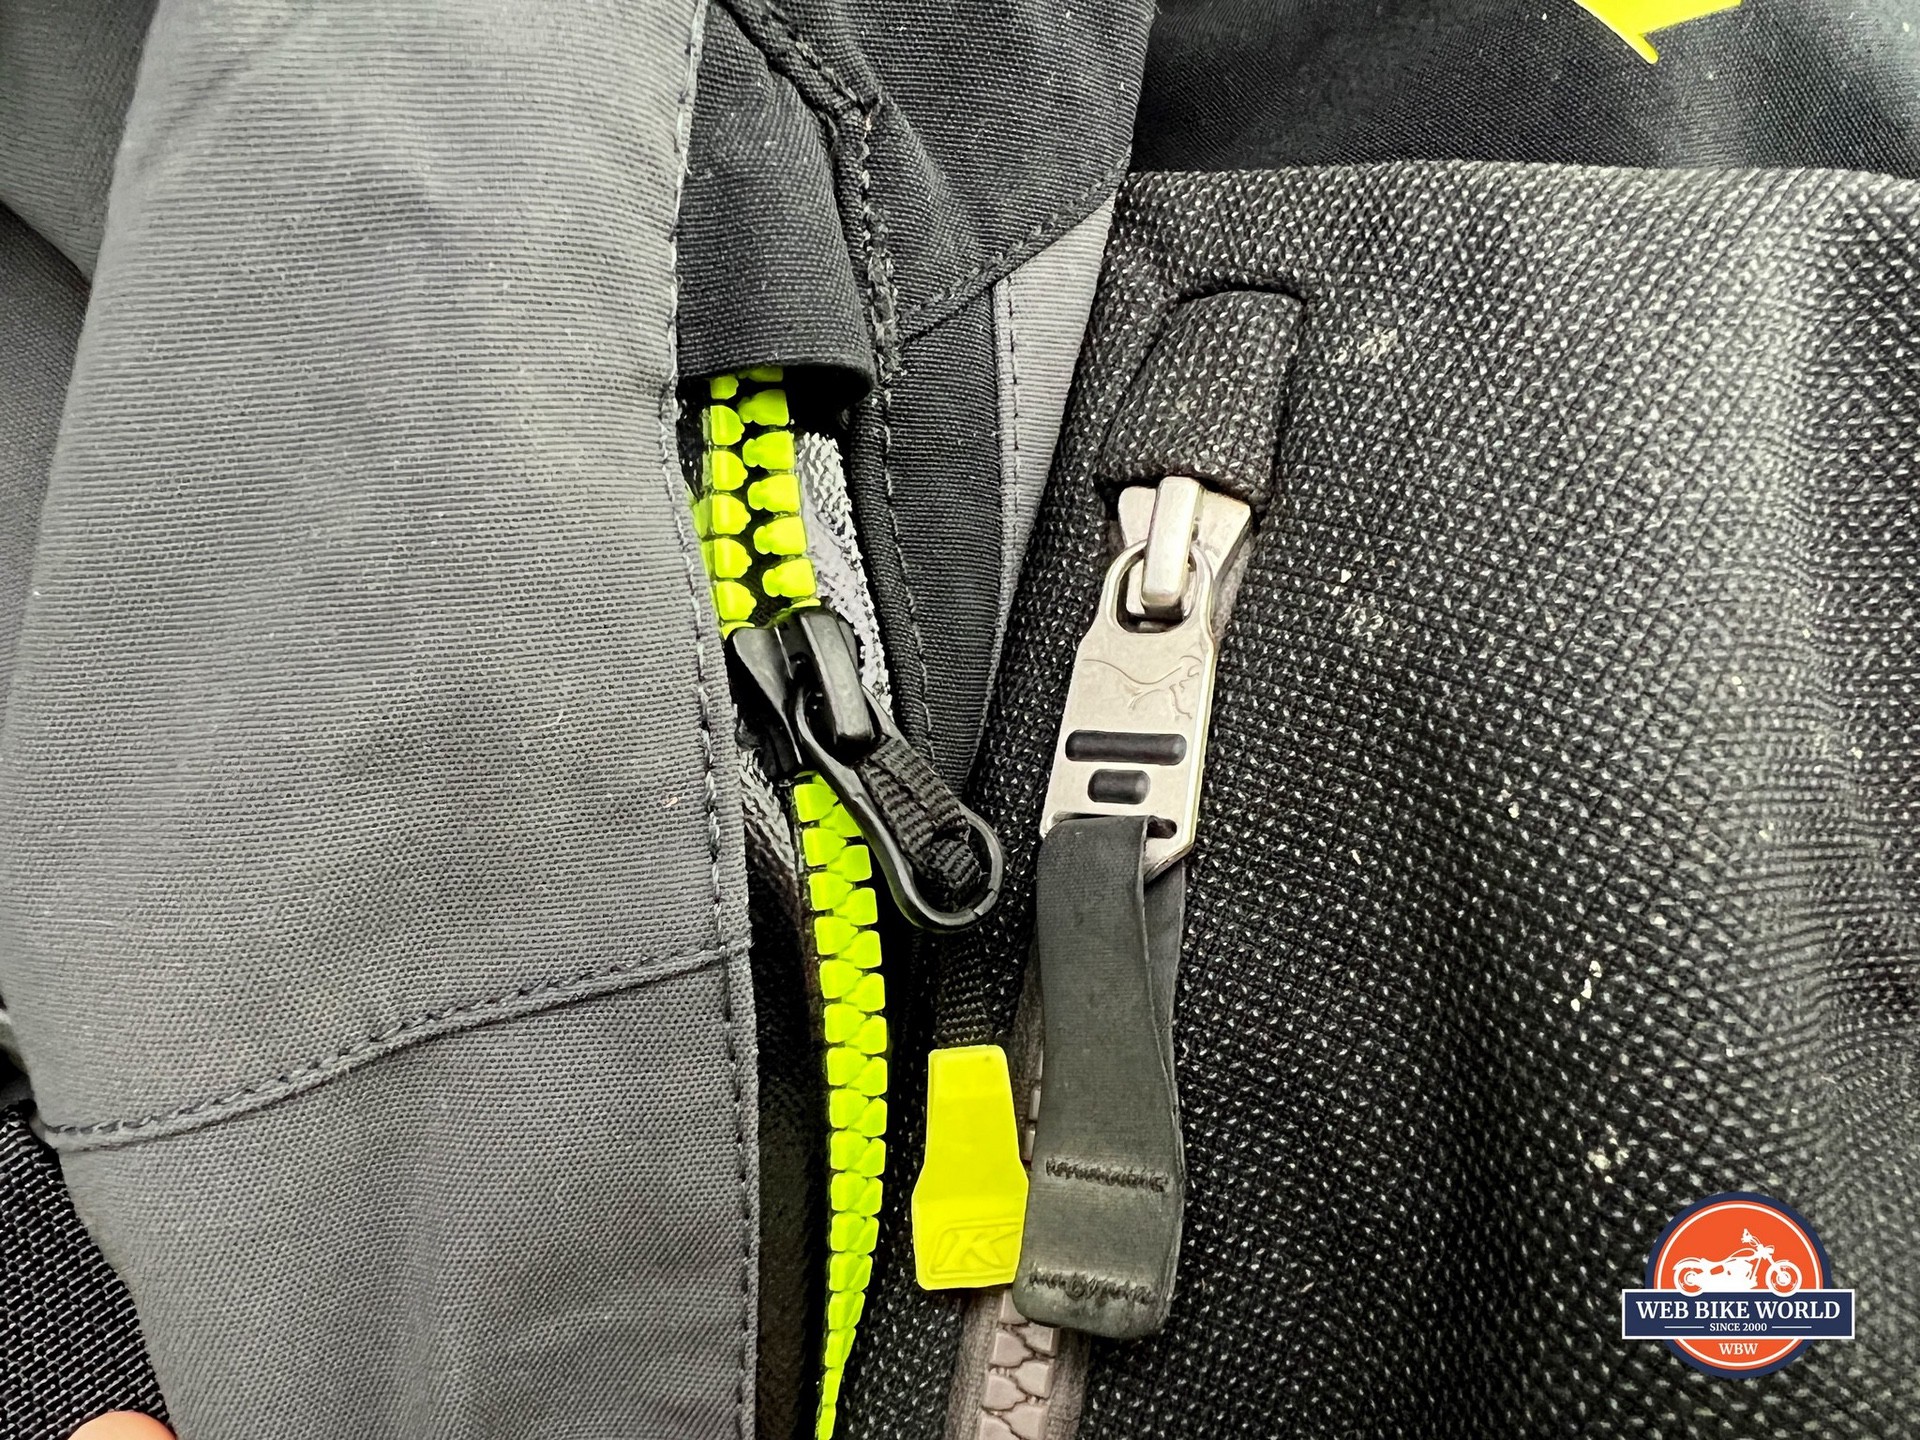 In this photo, you can see the huge difference in zipper pull tabs between the Klim and Mosko Moto jackets.